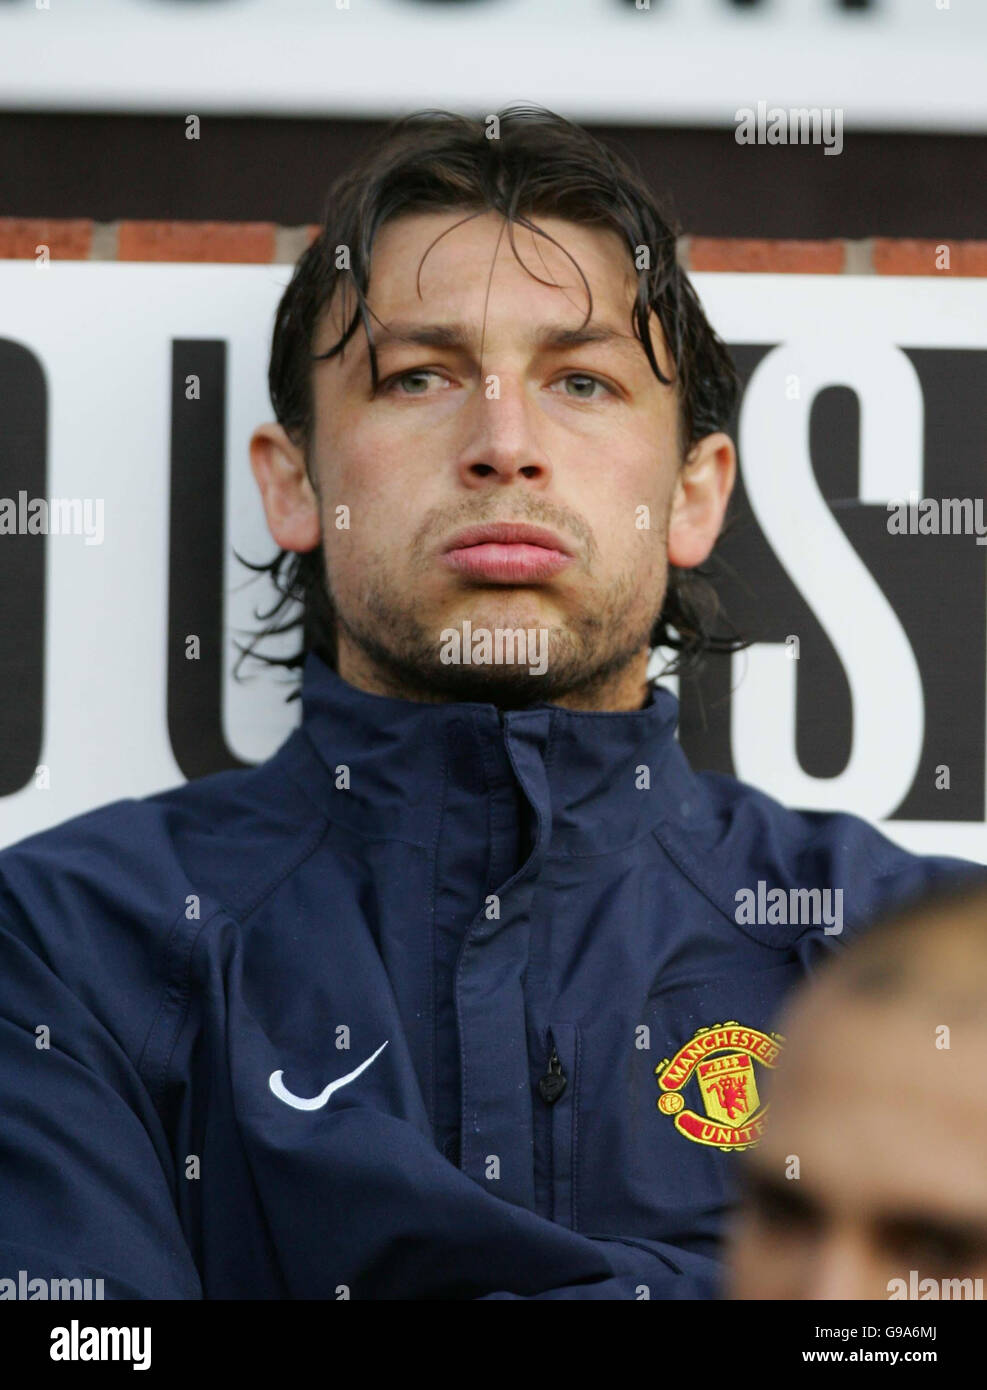 Manchester United substitute Gabriel Heinze on the bench during the Barclays Premiership match against Sunderland at Old Trafford, Manchester. Stock Photo